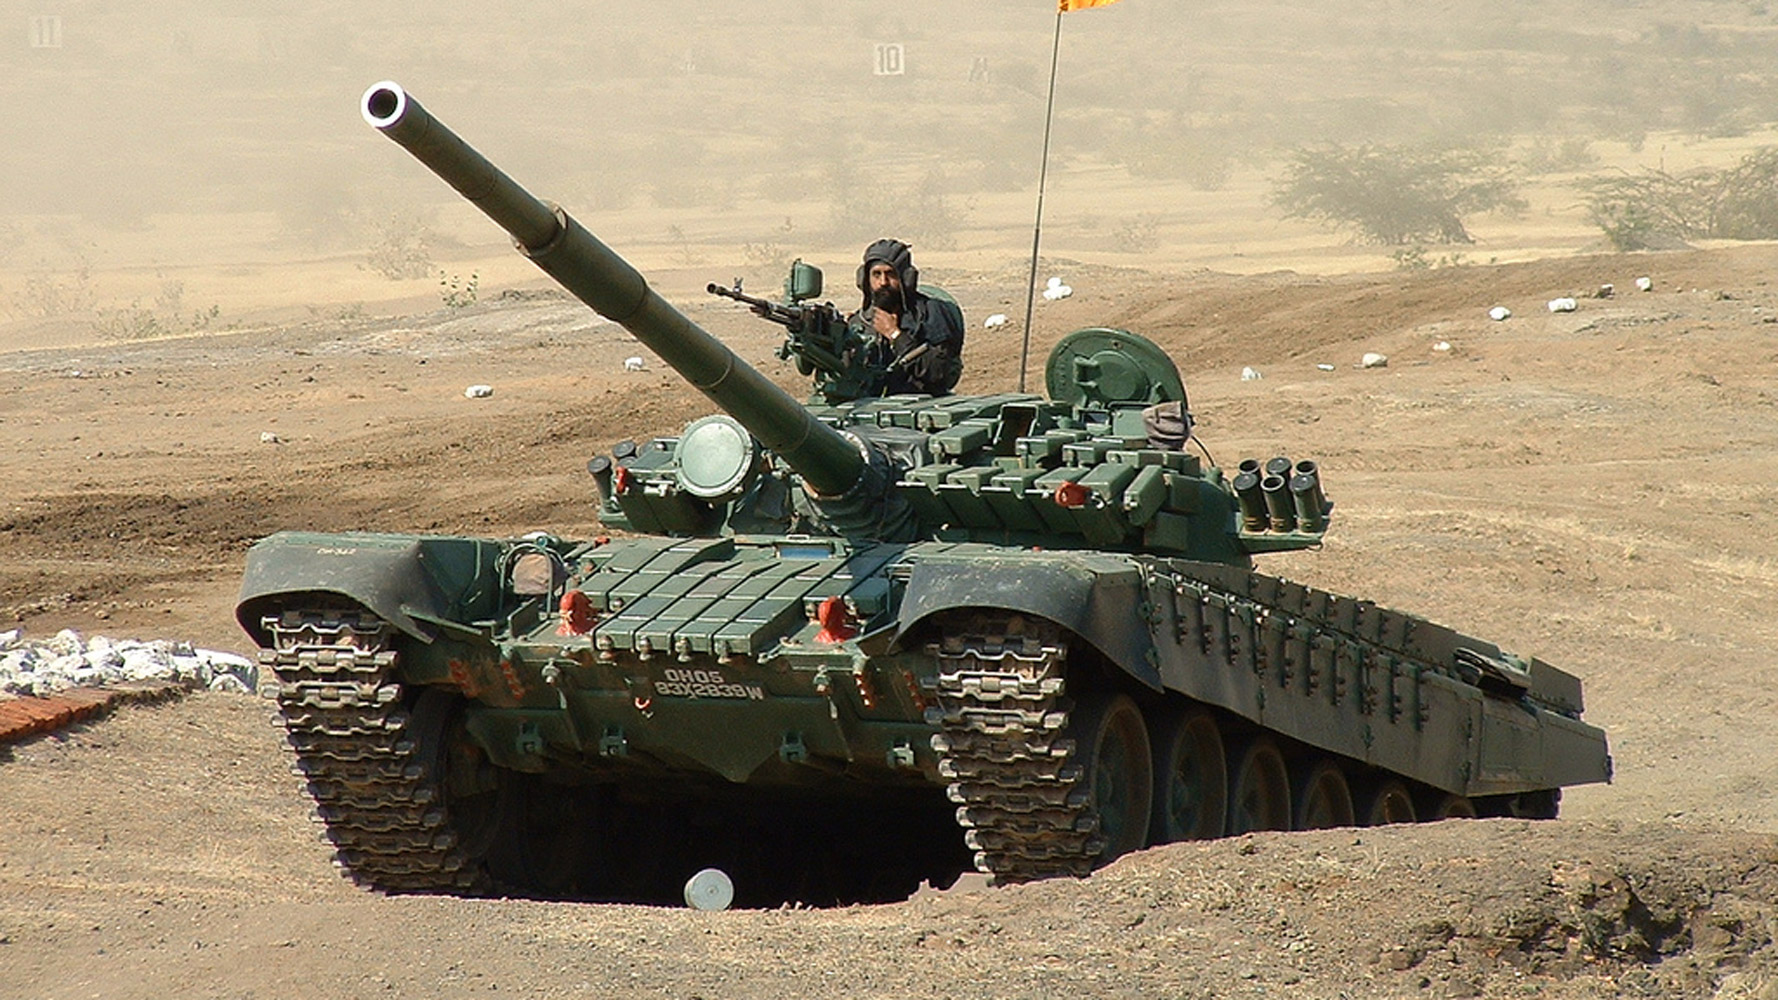 Indian Army T-72 main battle tank